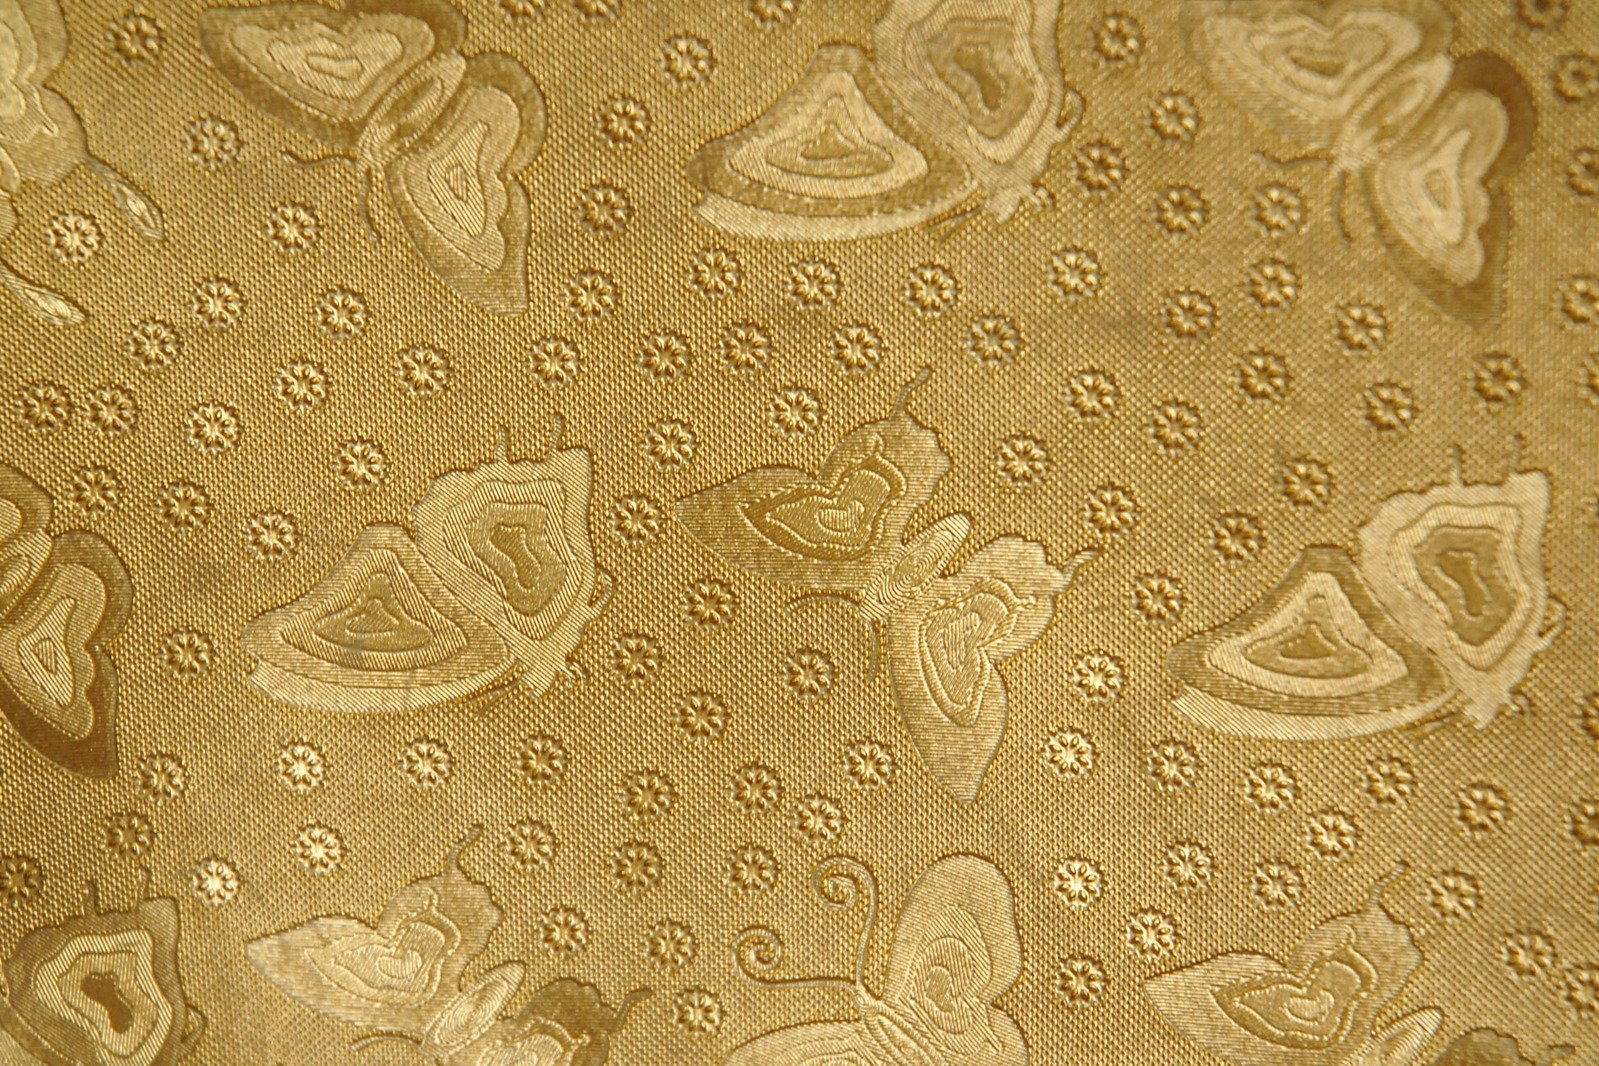 a golden wallpaper with ornate designs on it